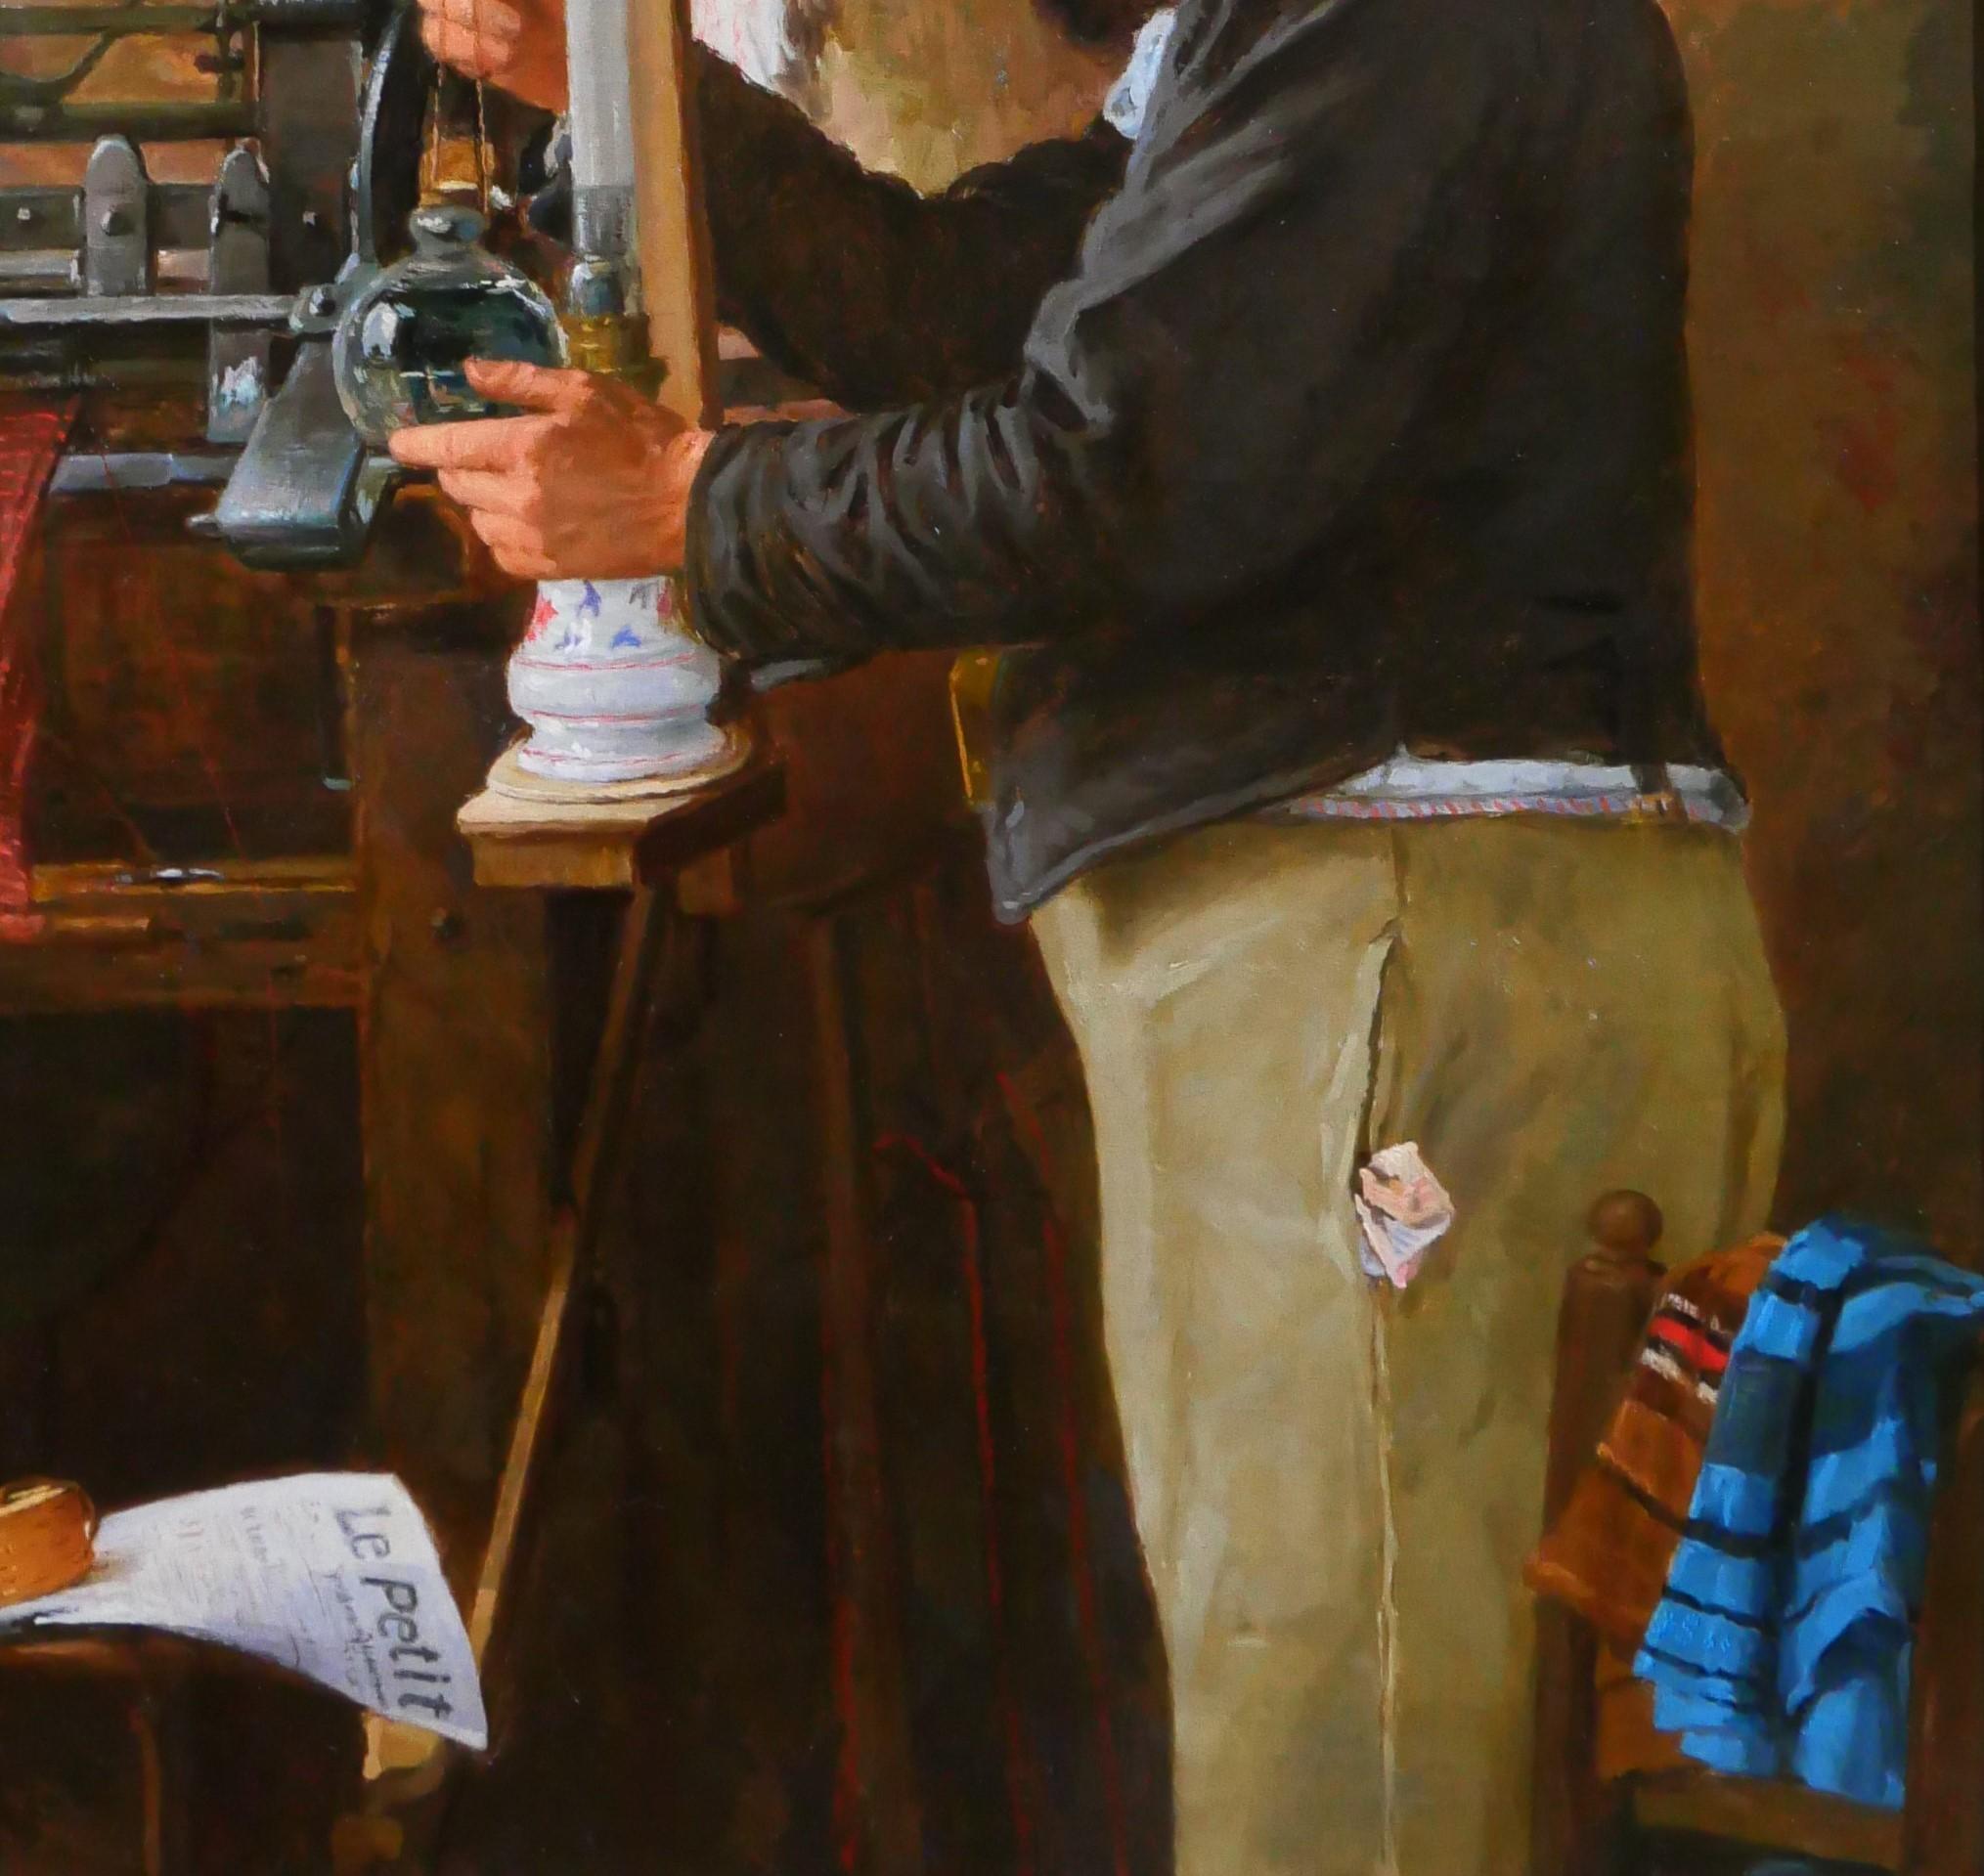 Edmond QUIGNARD
19-20th century, French
Weaver in his workshop
Painting, oil on canvas
Signed upper left
Painting: 68.5 x 96.5 cm (27 x 38 inches)
Beautiful original frame: 94.5 x 125 cm (37.2 x 49.2 inches) (warnbing large size)
Very good